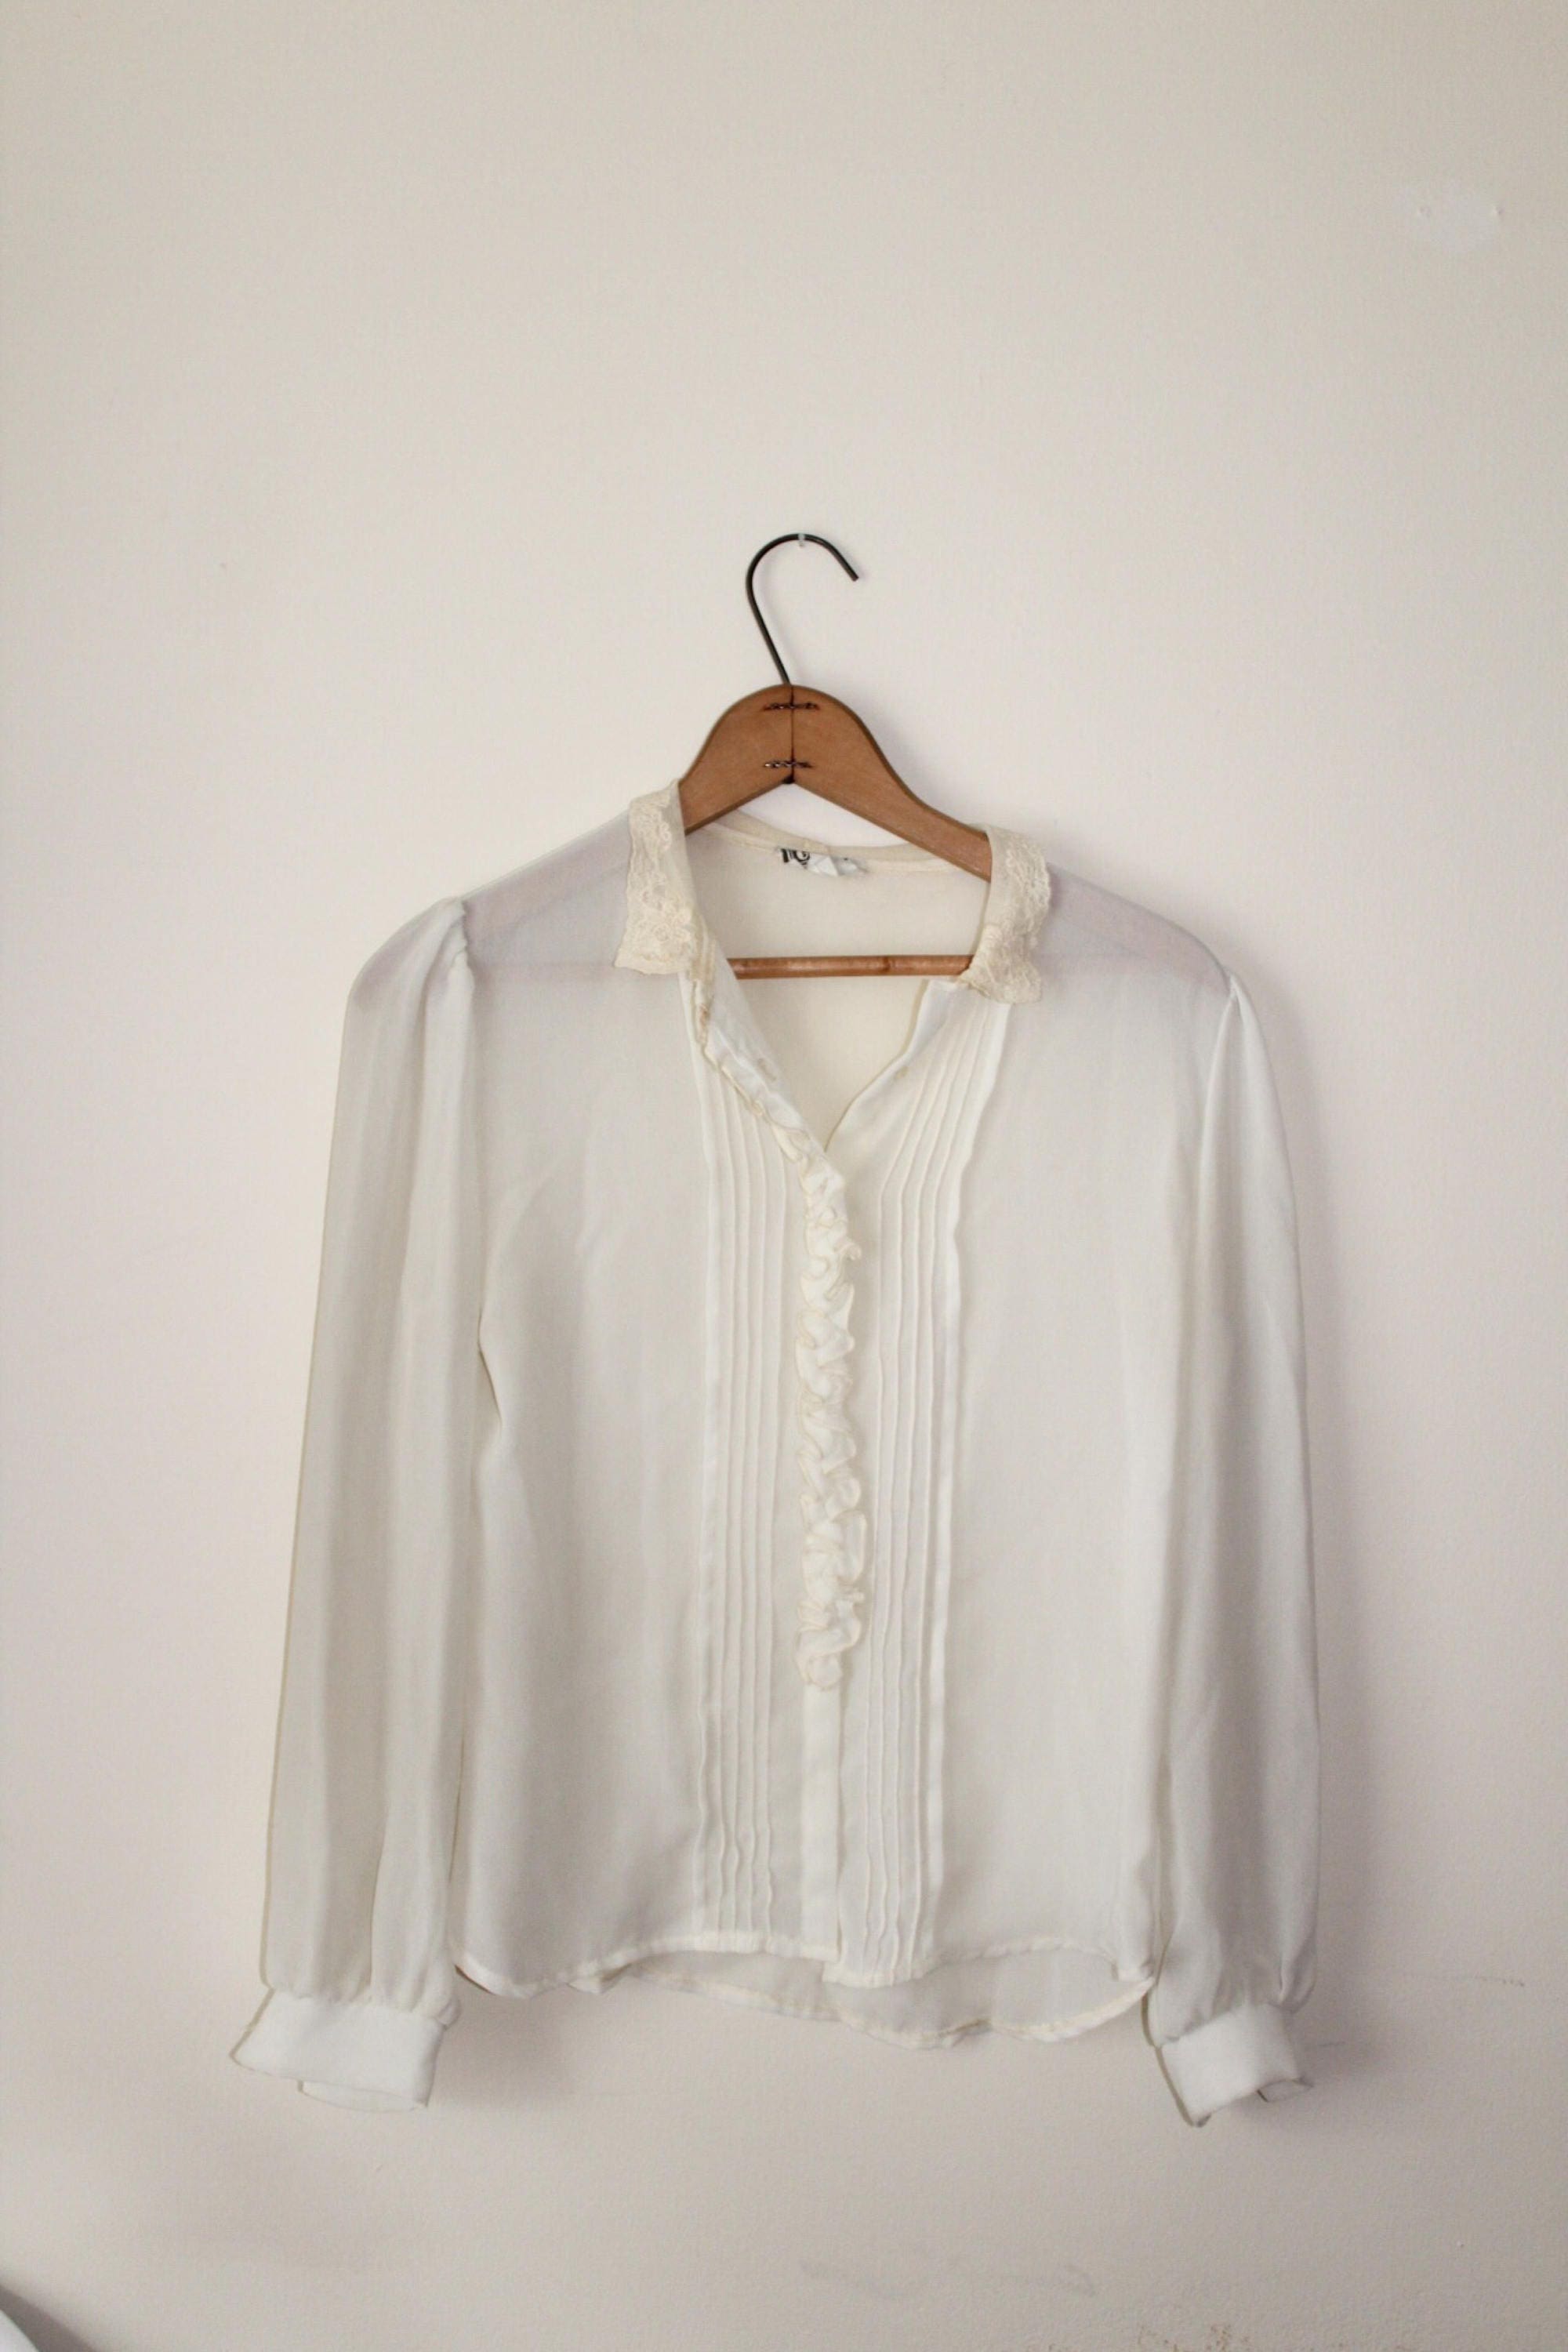 Vintage Sheer Victorian Ruffled Blouse Ladies 70s Button Down